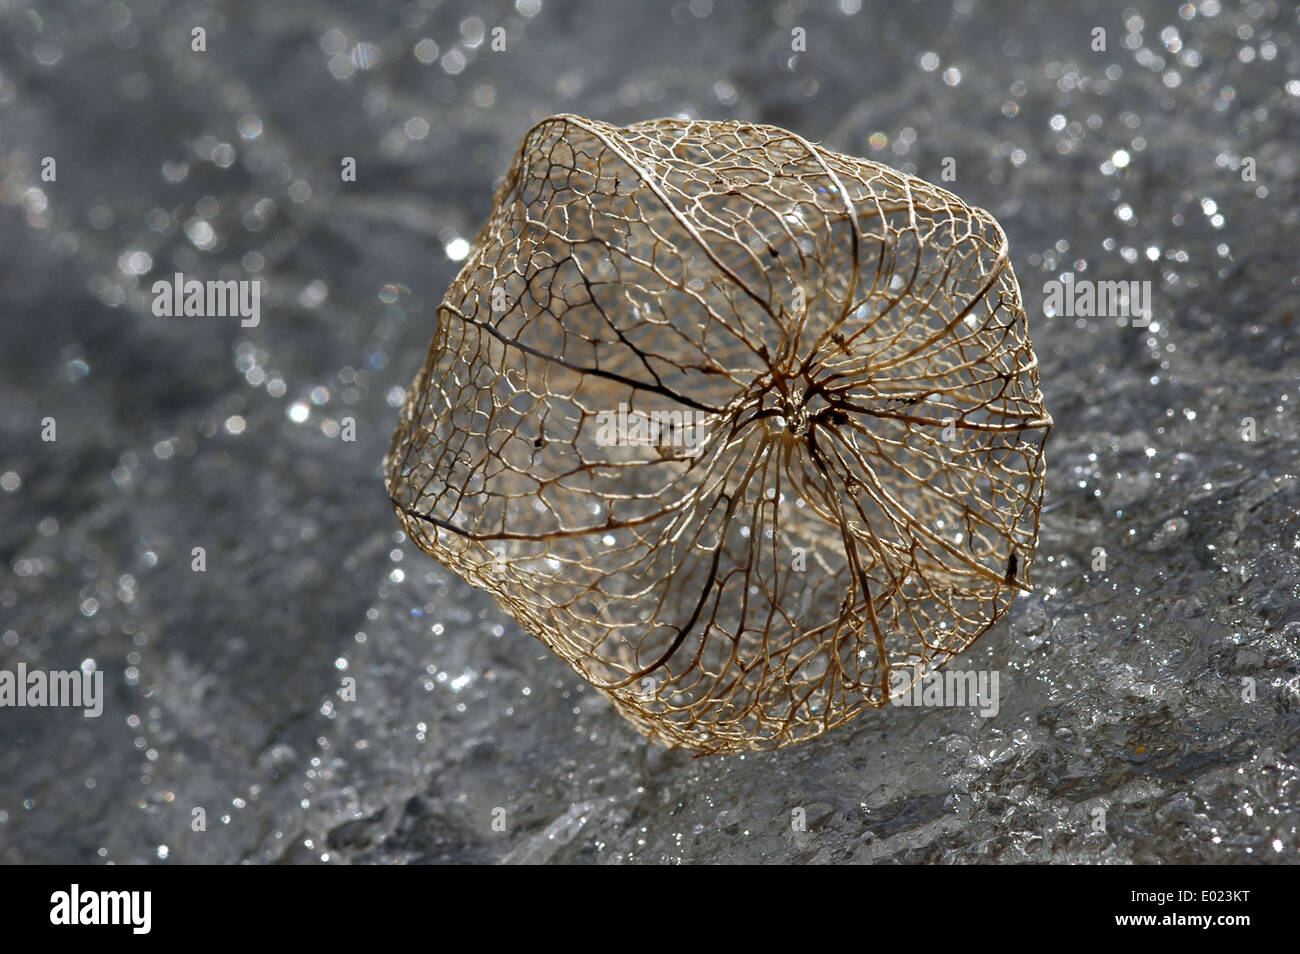 Physalis lantern on spotted ice background Stock Photo